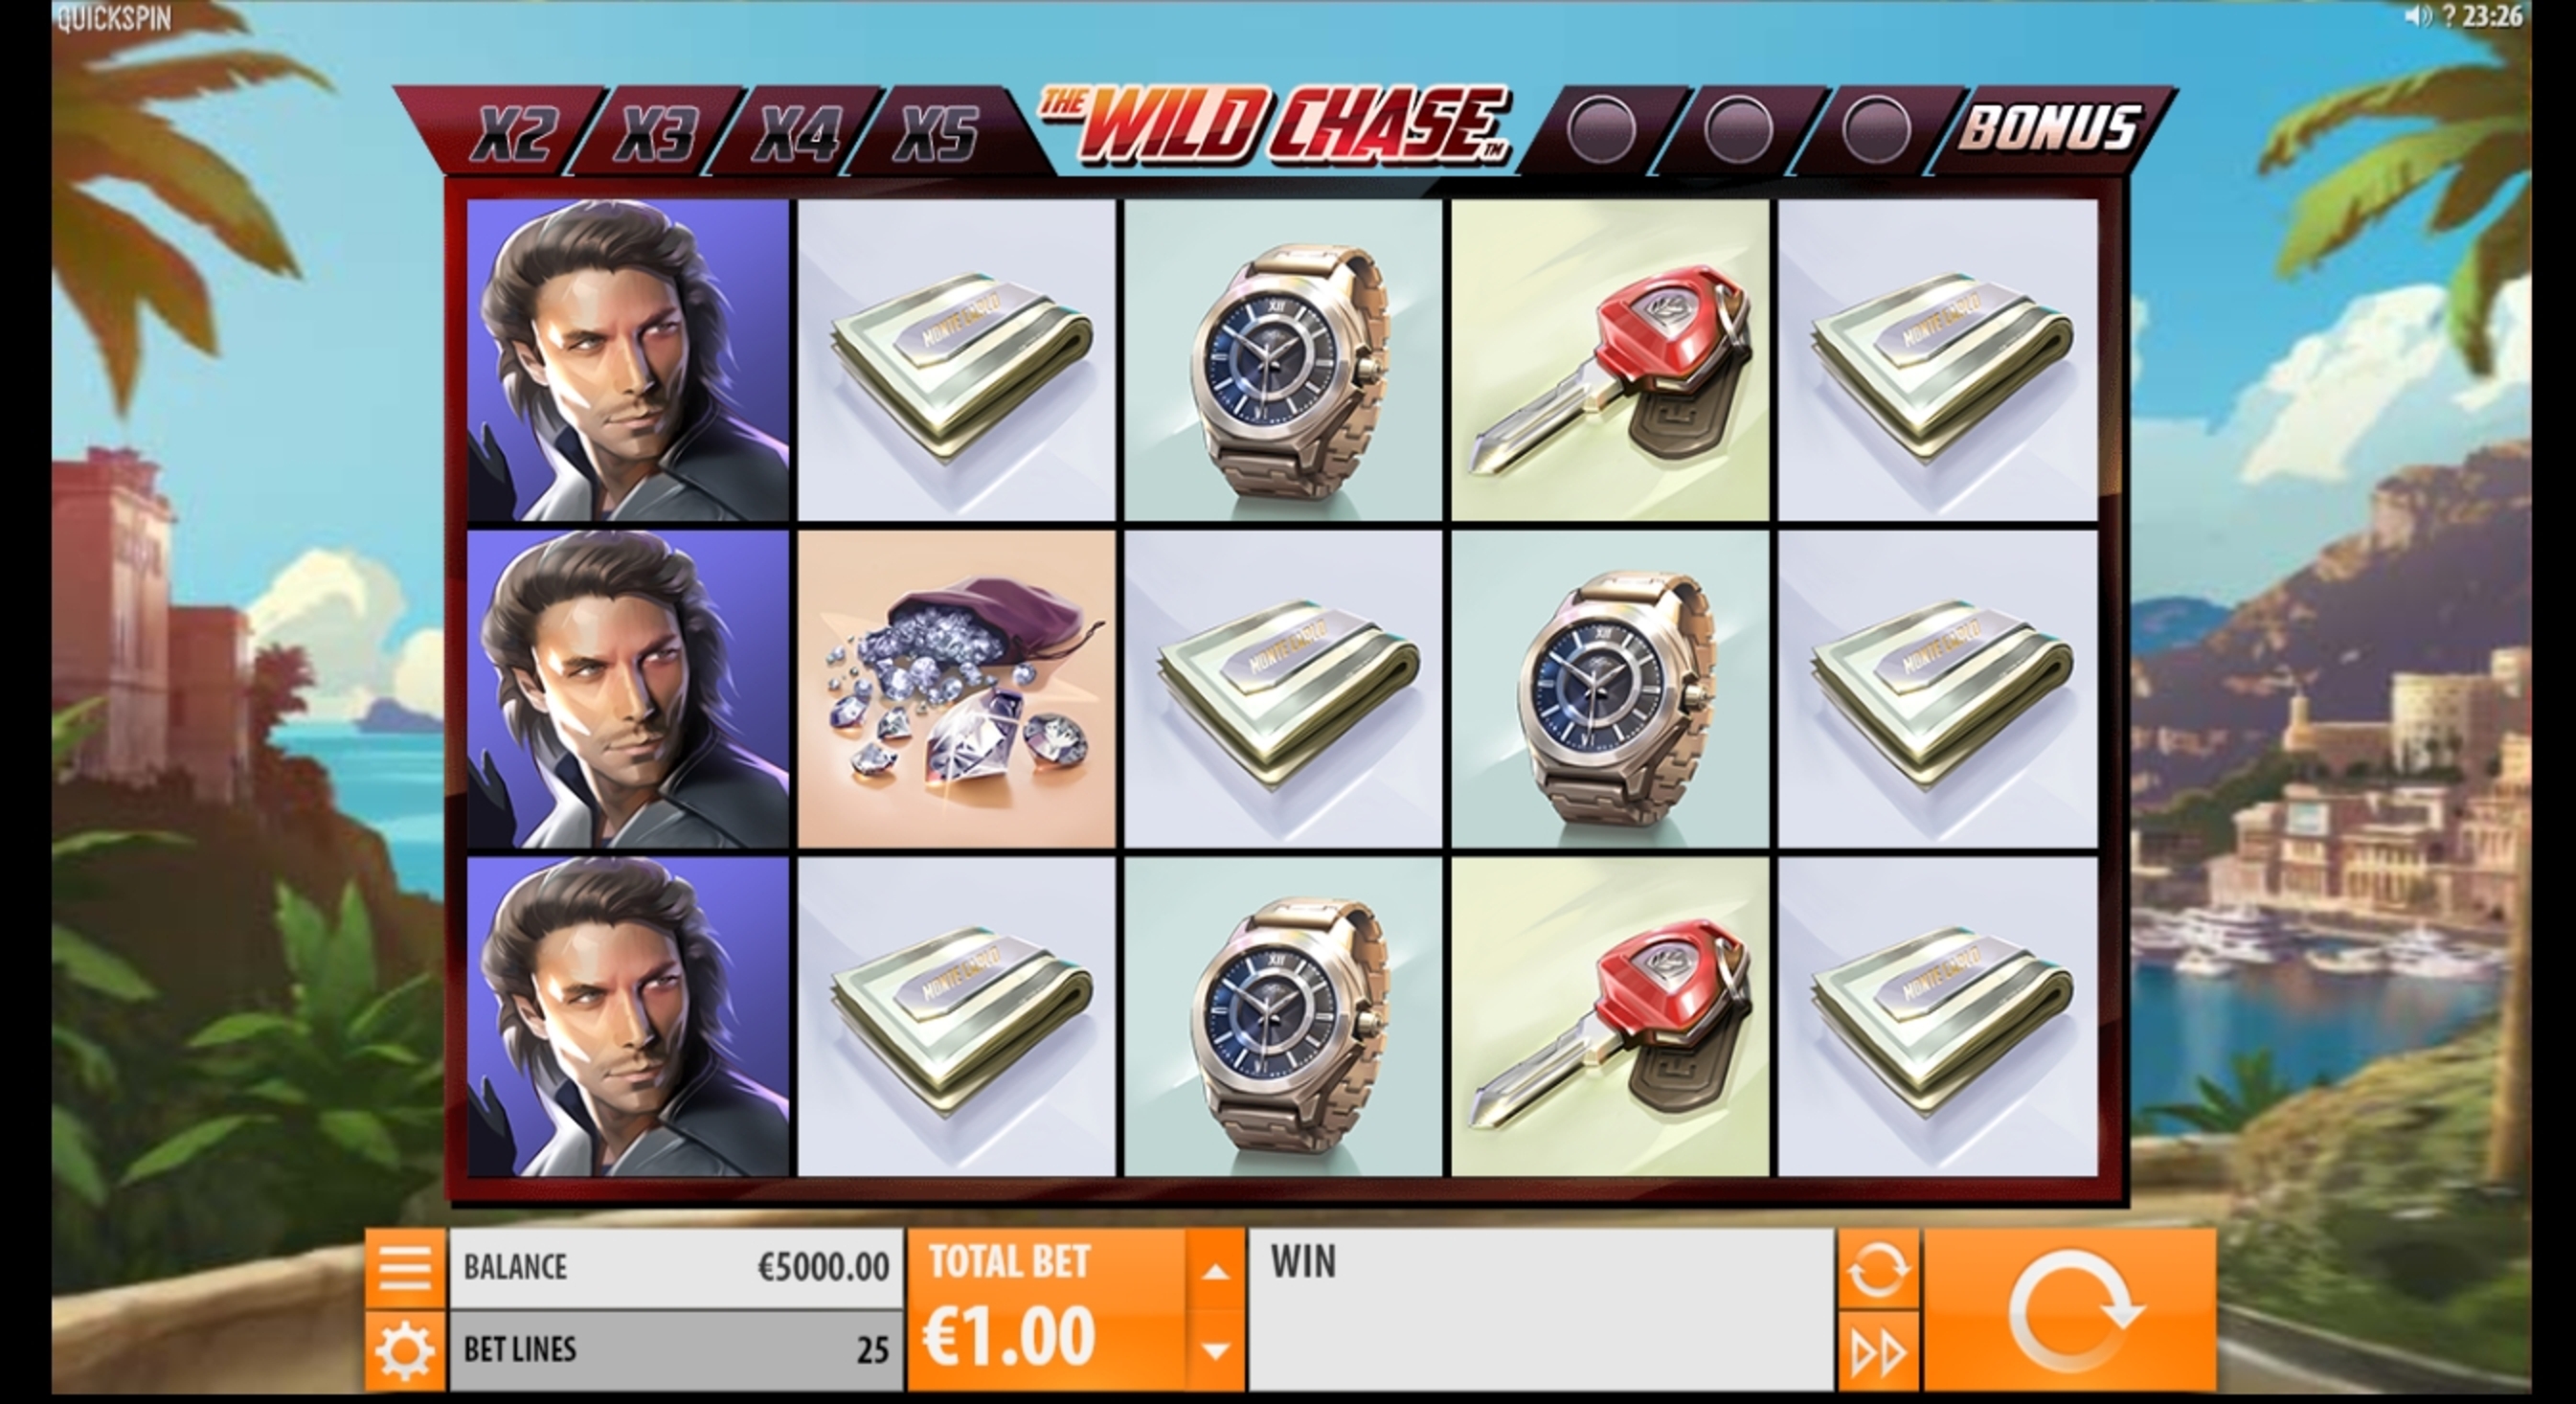 Reels in The Wild Chase Slot Game by Quickspin